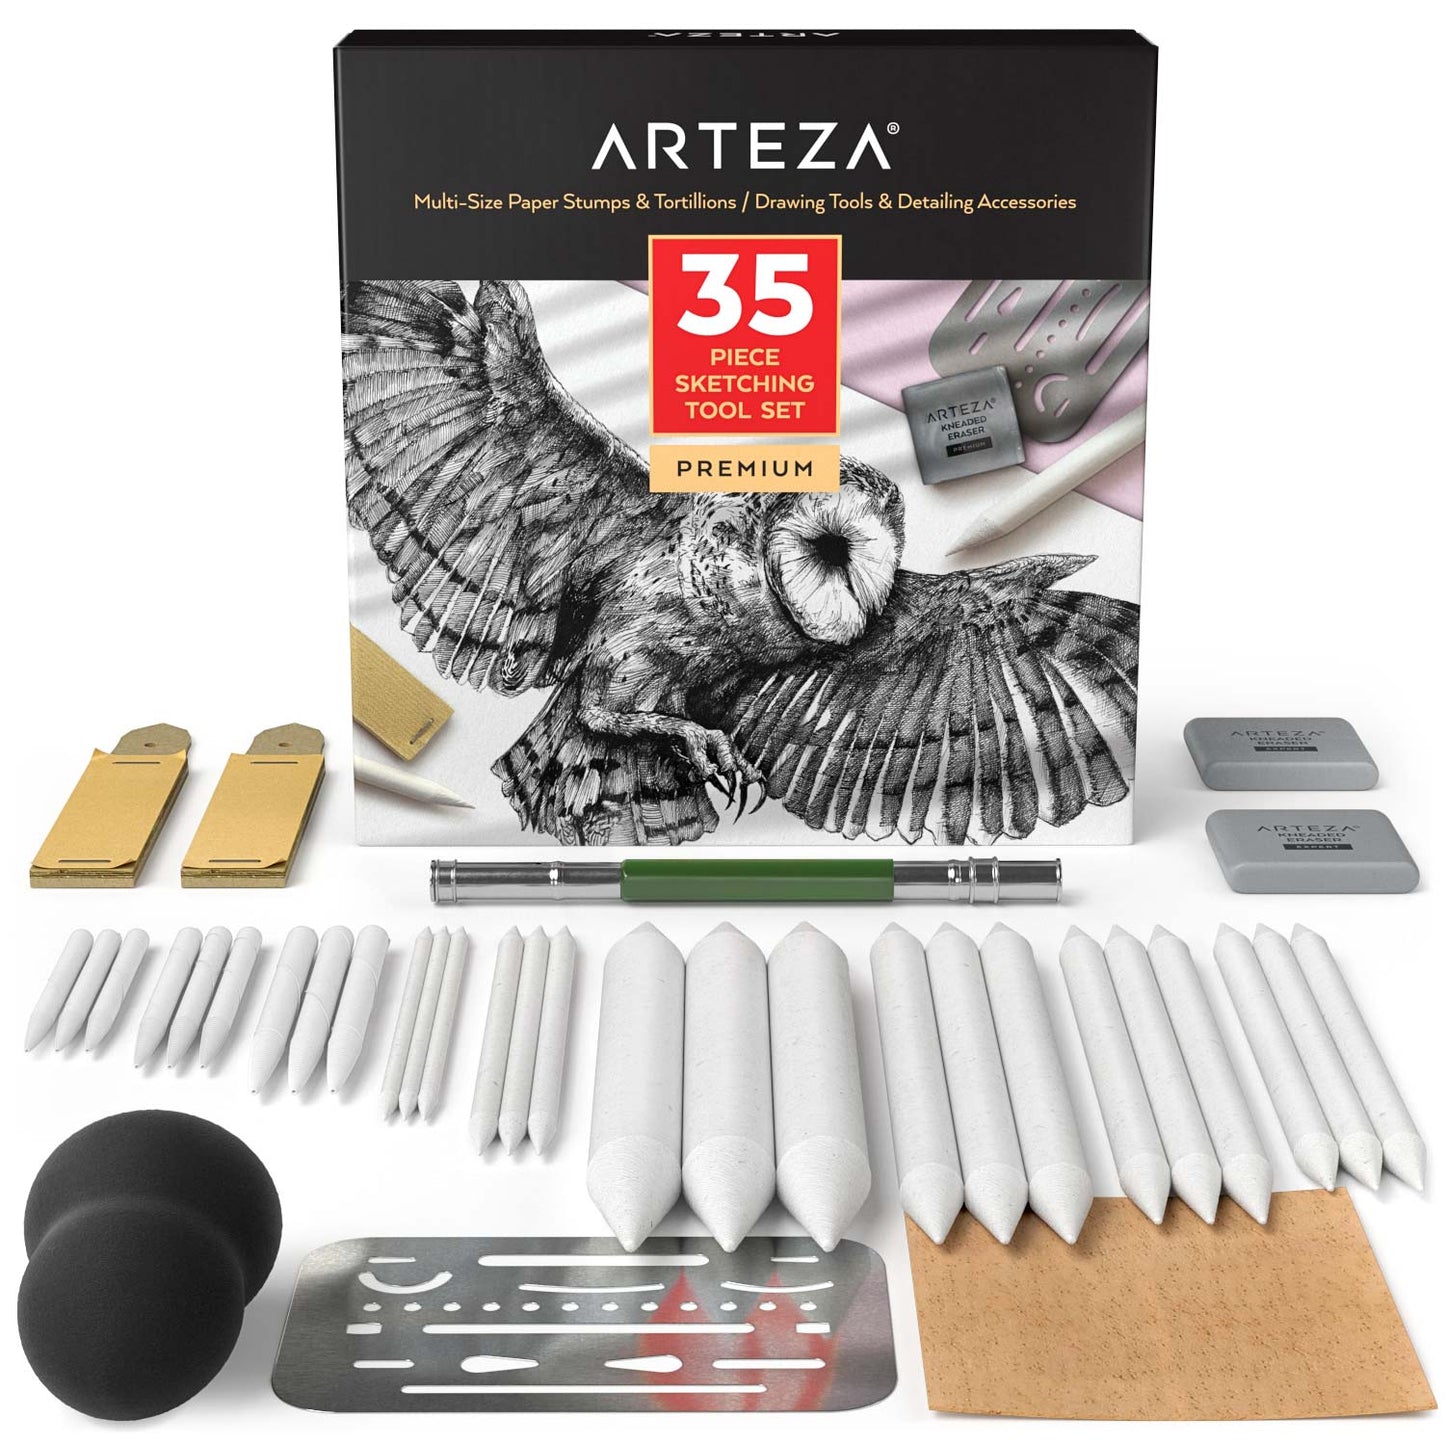 35 Piece Sketch and Drawing Art Set Pennelli Quality Artist